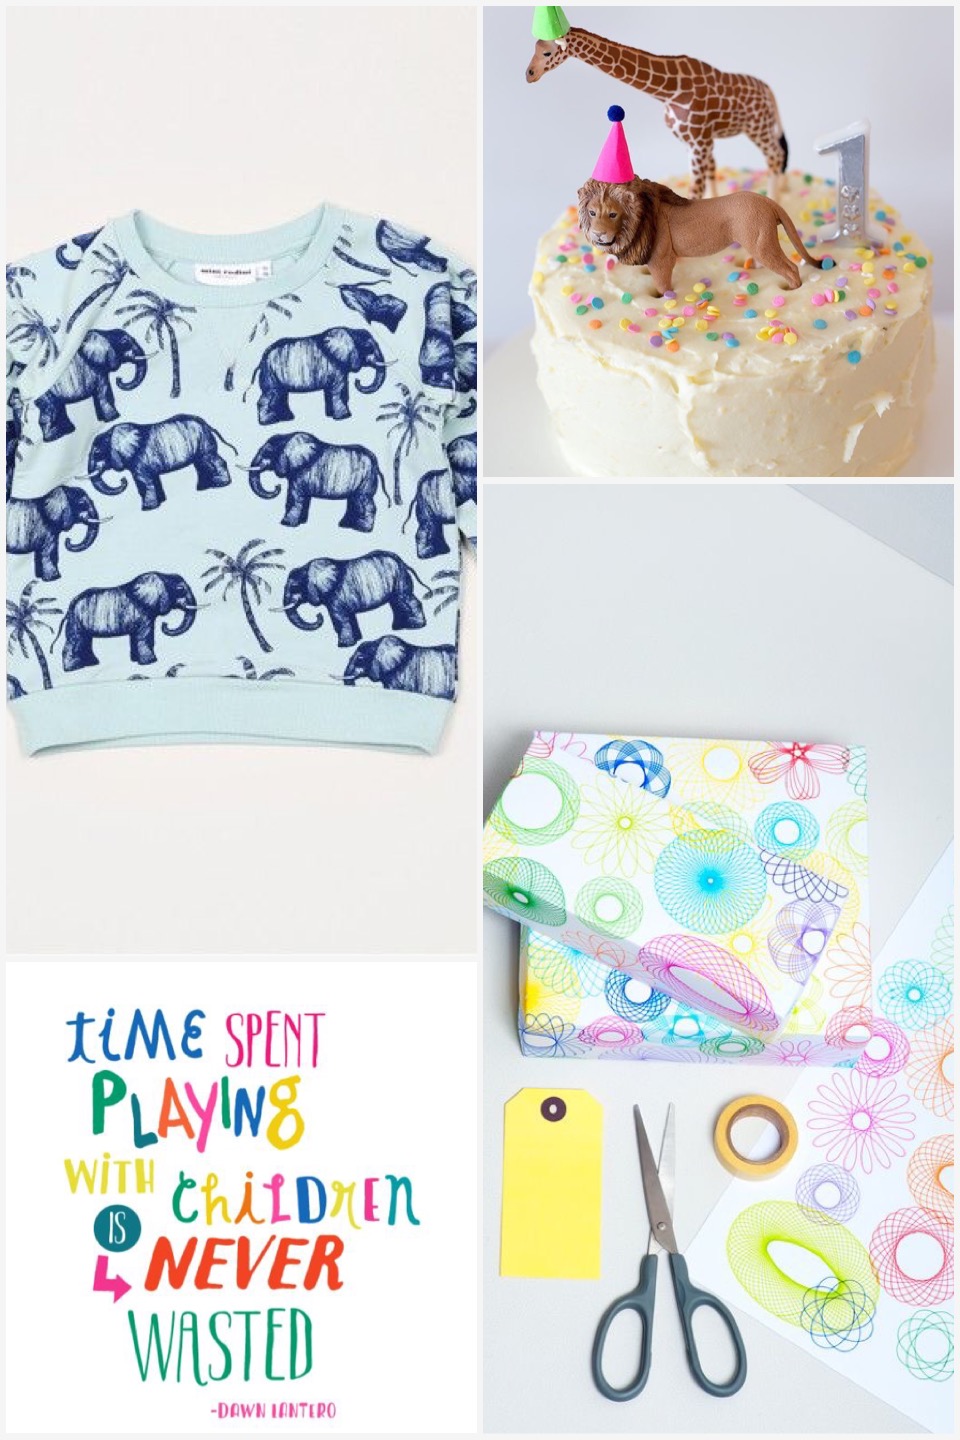 Fab Friday - Birthday inspired. Elephant 🐘 jersey, animal cake, spirograph wrapping, playing with children isn't a waste of time ever quote